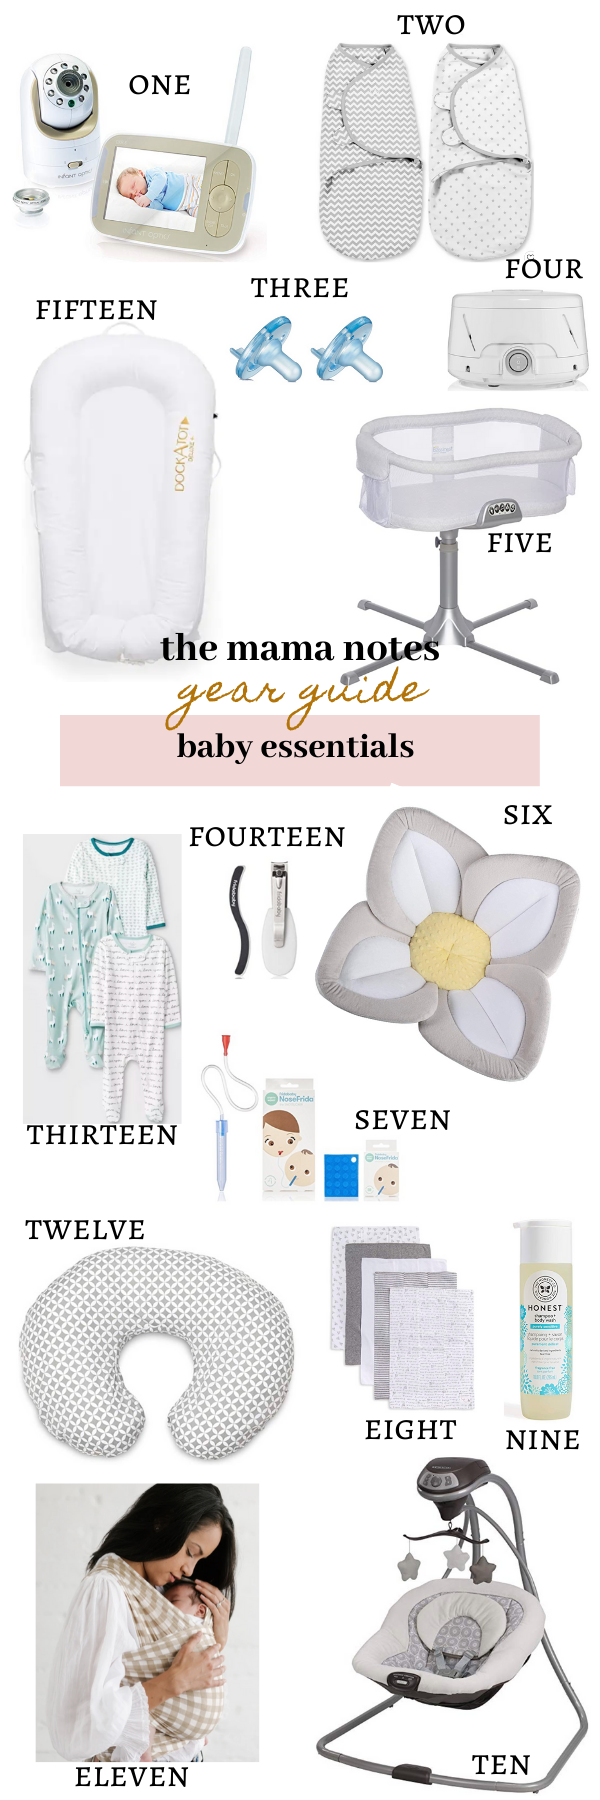 https://themamanotes.com/wp-content/uploads/2020/03/baby-essentials-for-baby-number-3.png